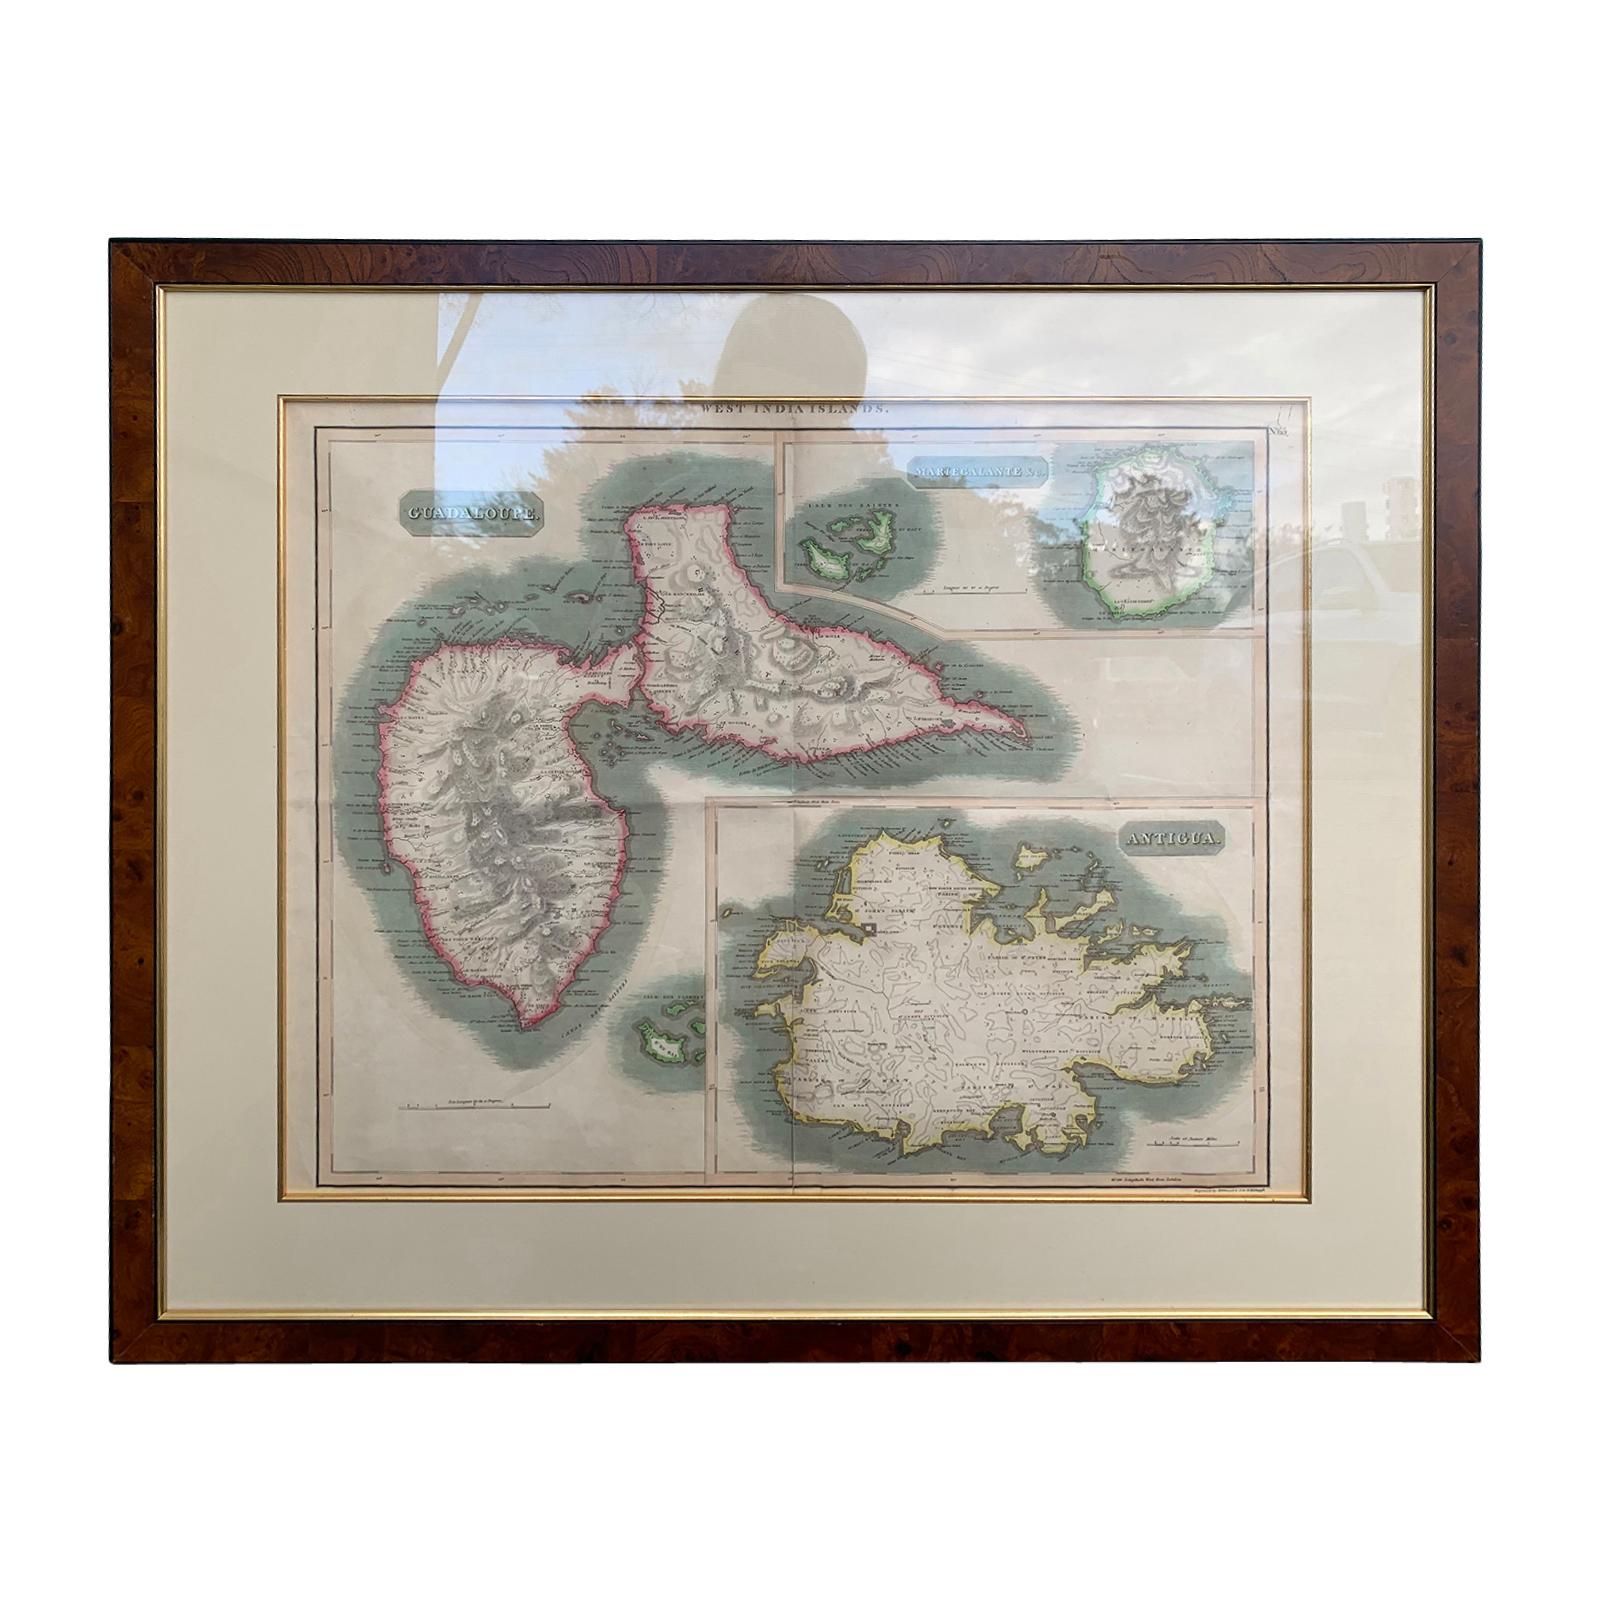 Pair of engraved maps by Kirkwood & Son of Edinburgh of West India Islands for John Thomson's 1817 